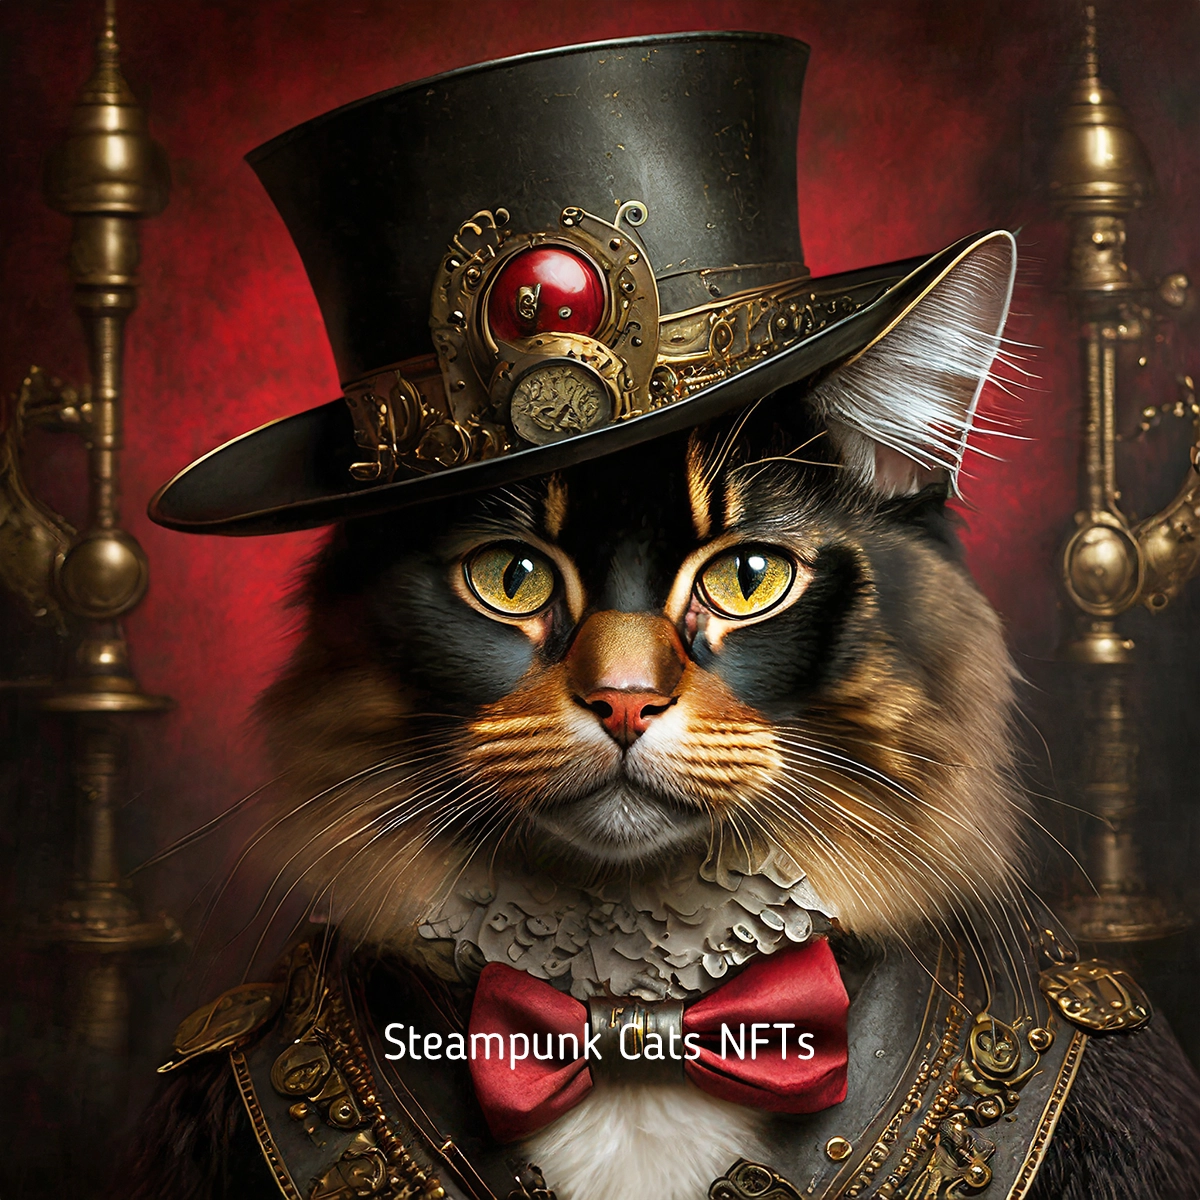 Steampunk Cats NFTs Revealed